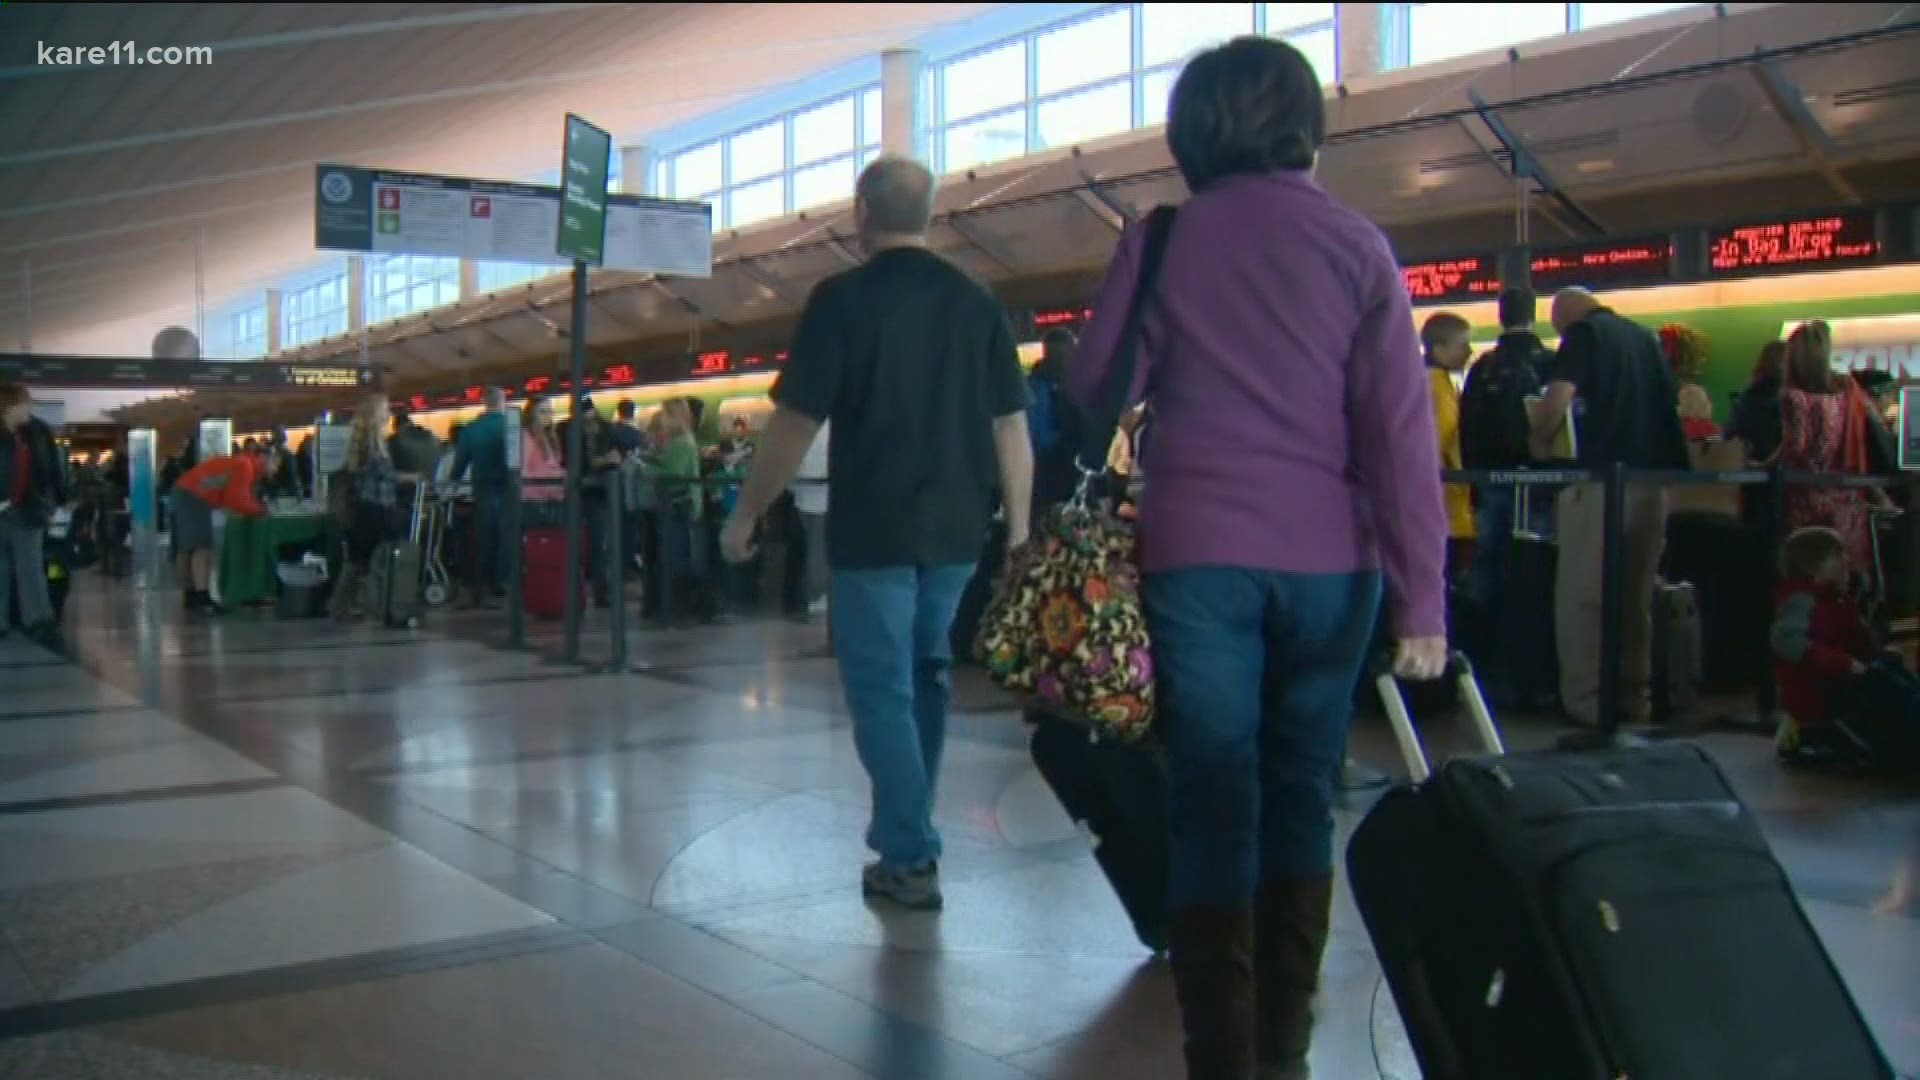 Consumer complaints are skyrocketing as people try to re-schedule flights or use vouchers because of COVID. A Travel expert has tips to get your money back.